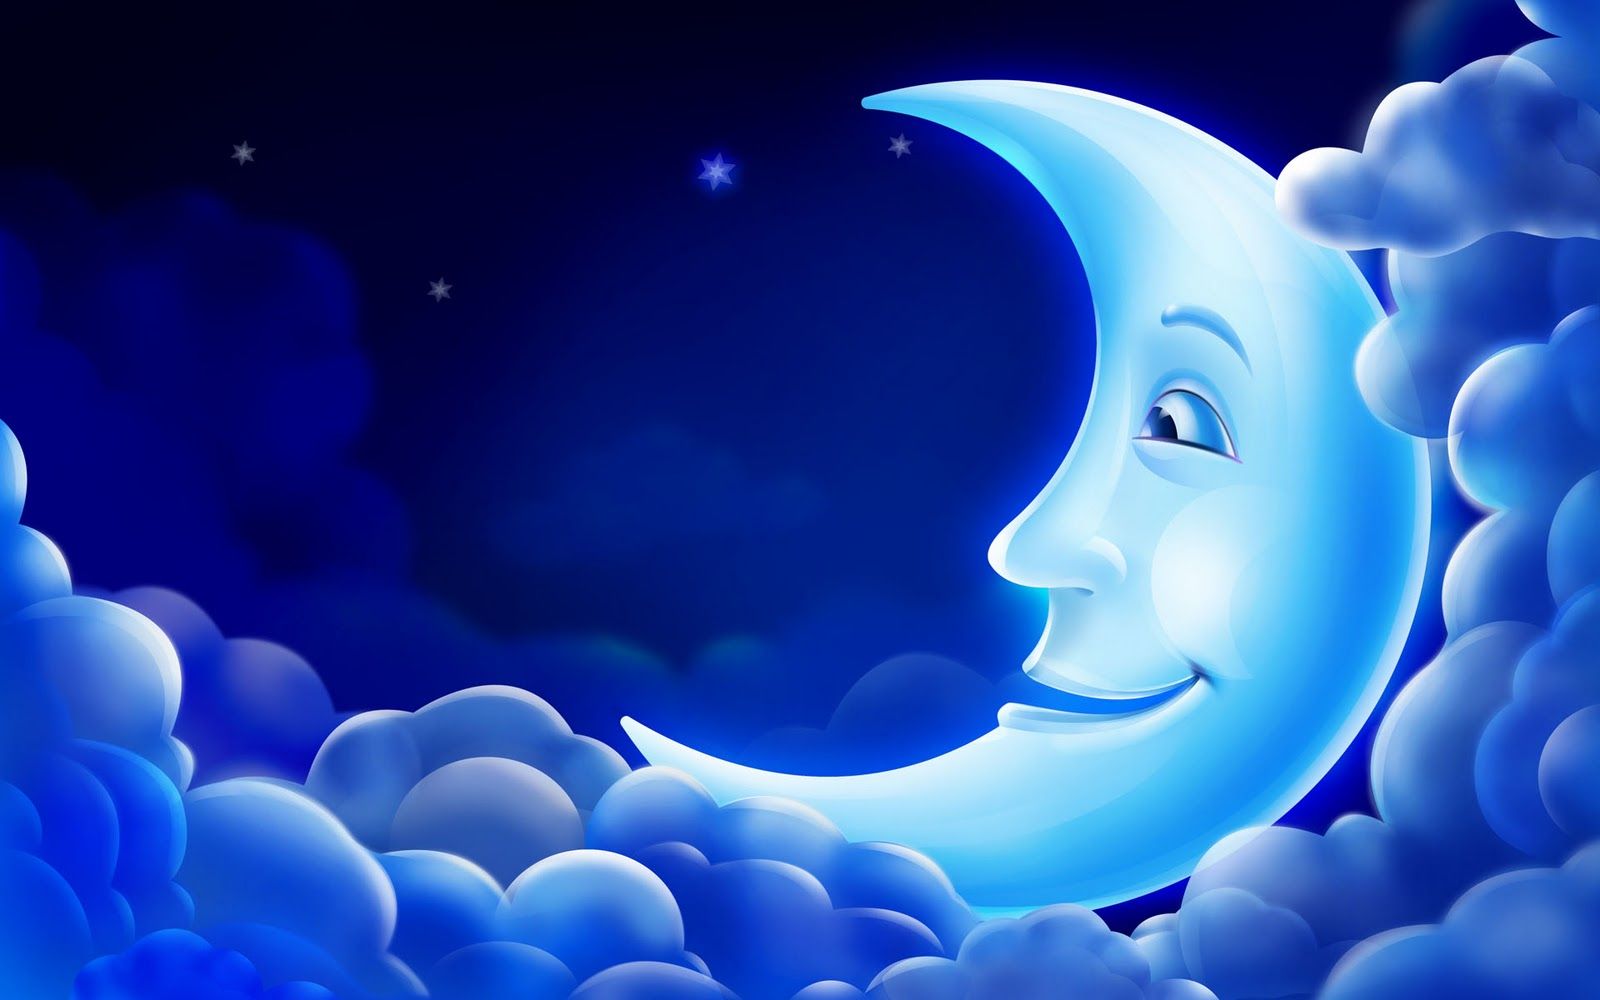 Download Cg Animation Pc Background Blue Moon Smile Sky Star